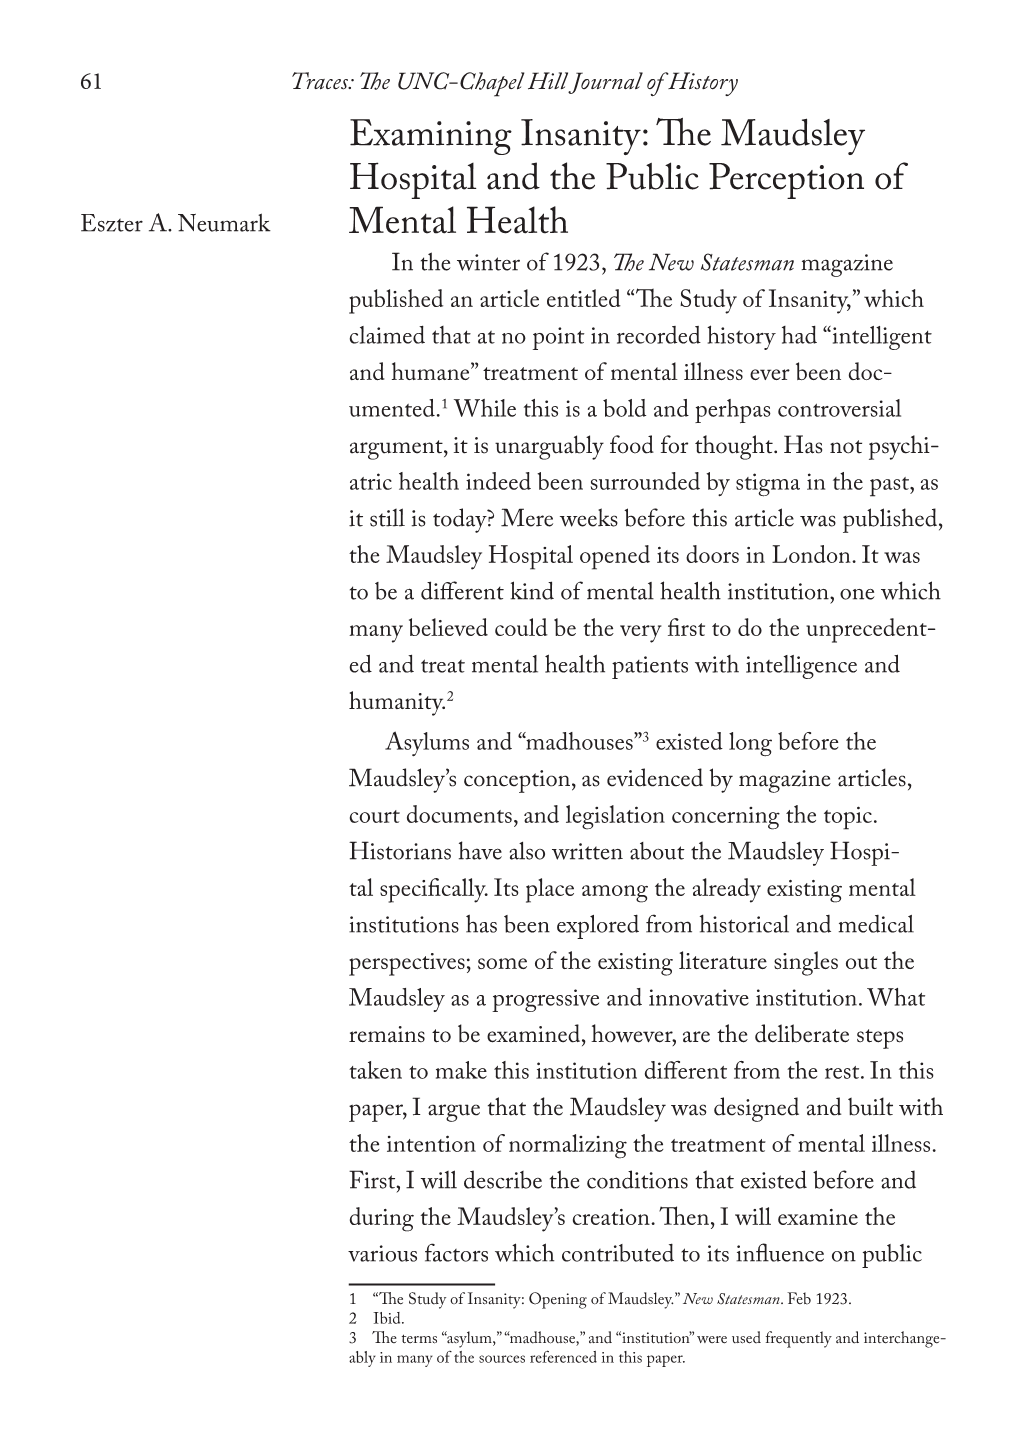 The Maudsley Hospital and the Public Perception of Mental Health